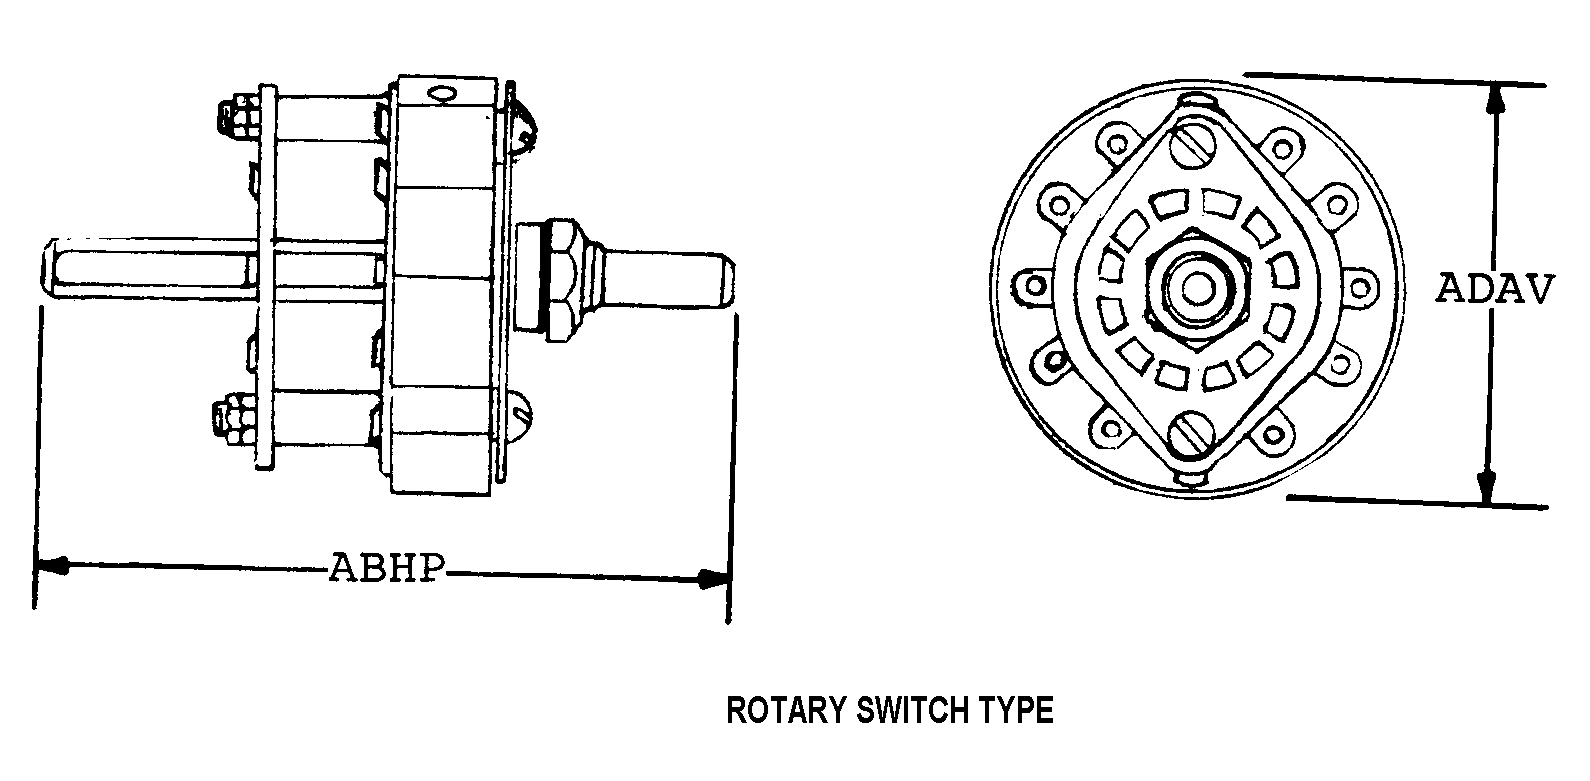 ROTARY SWITCH TYPE style nsn 5985-01-217-5321